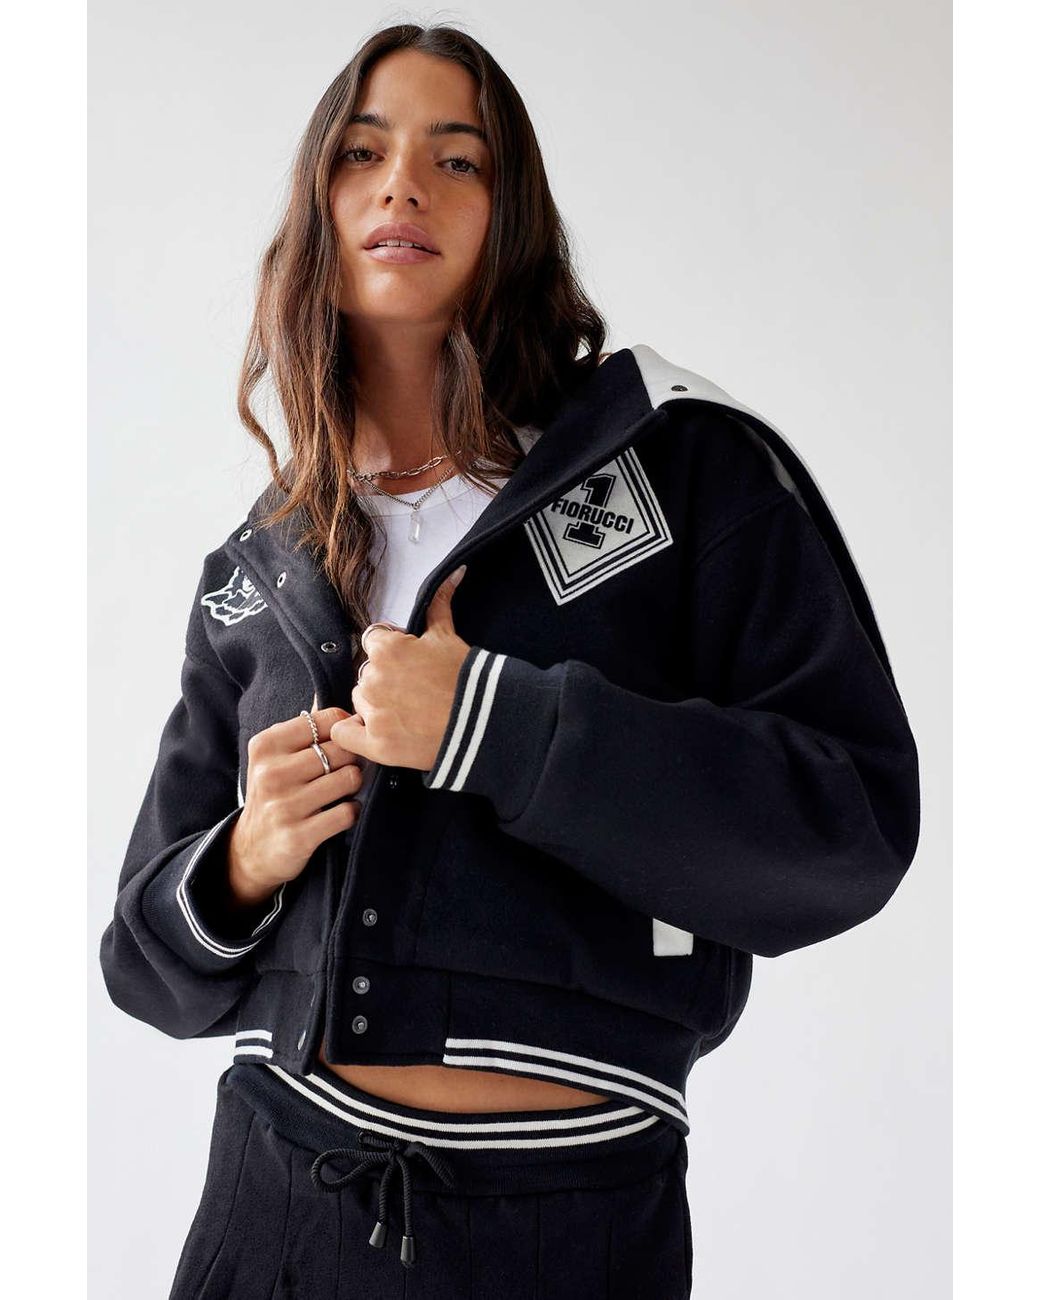 Fiorucci Marching Band Varsity Jacket in Black